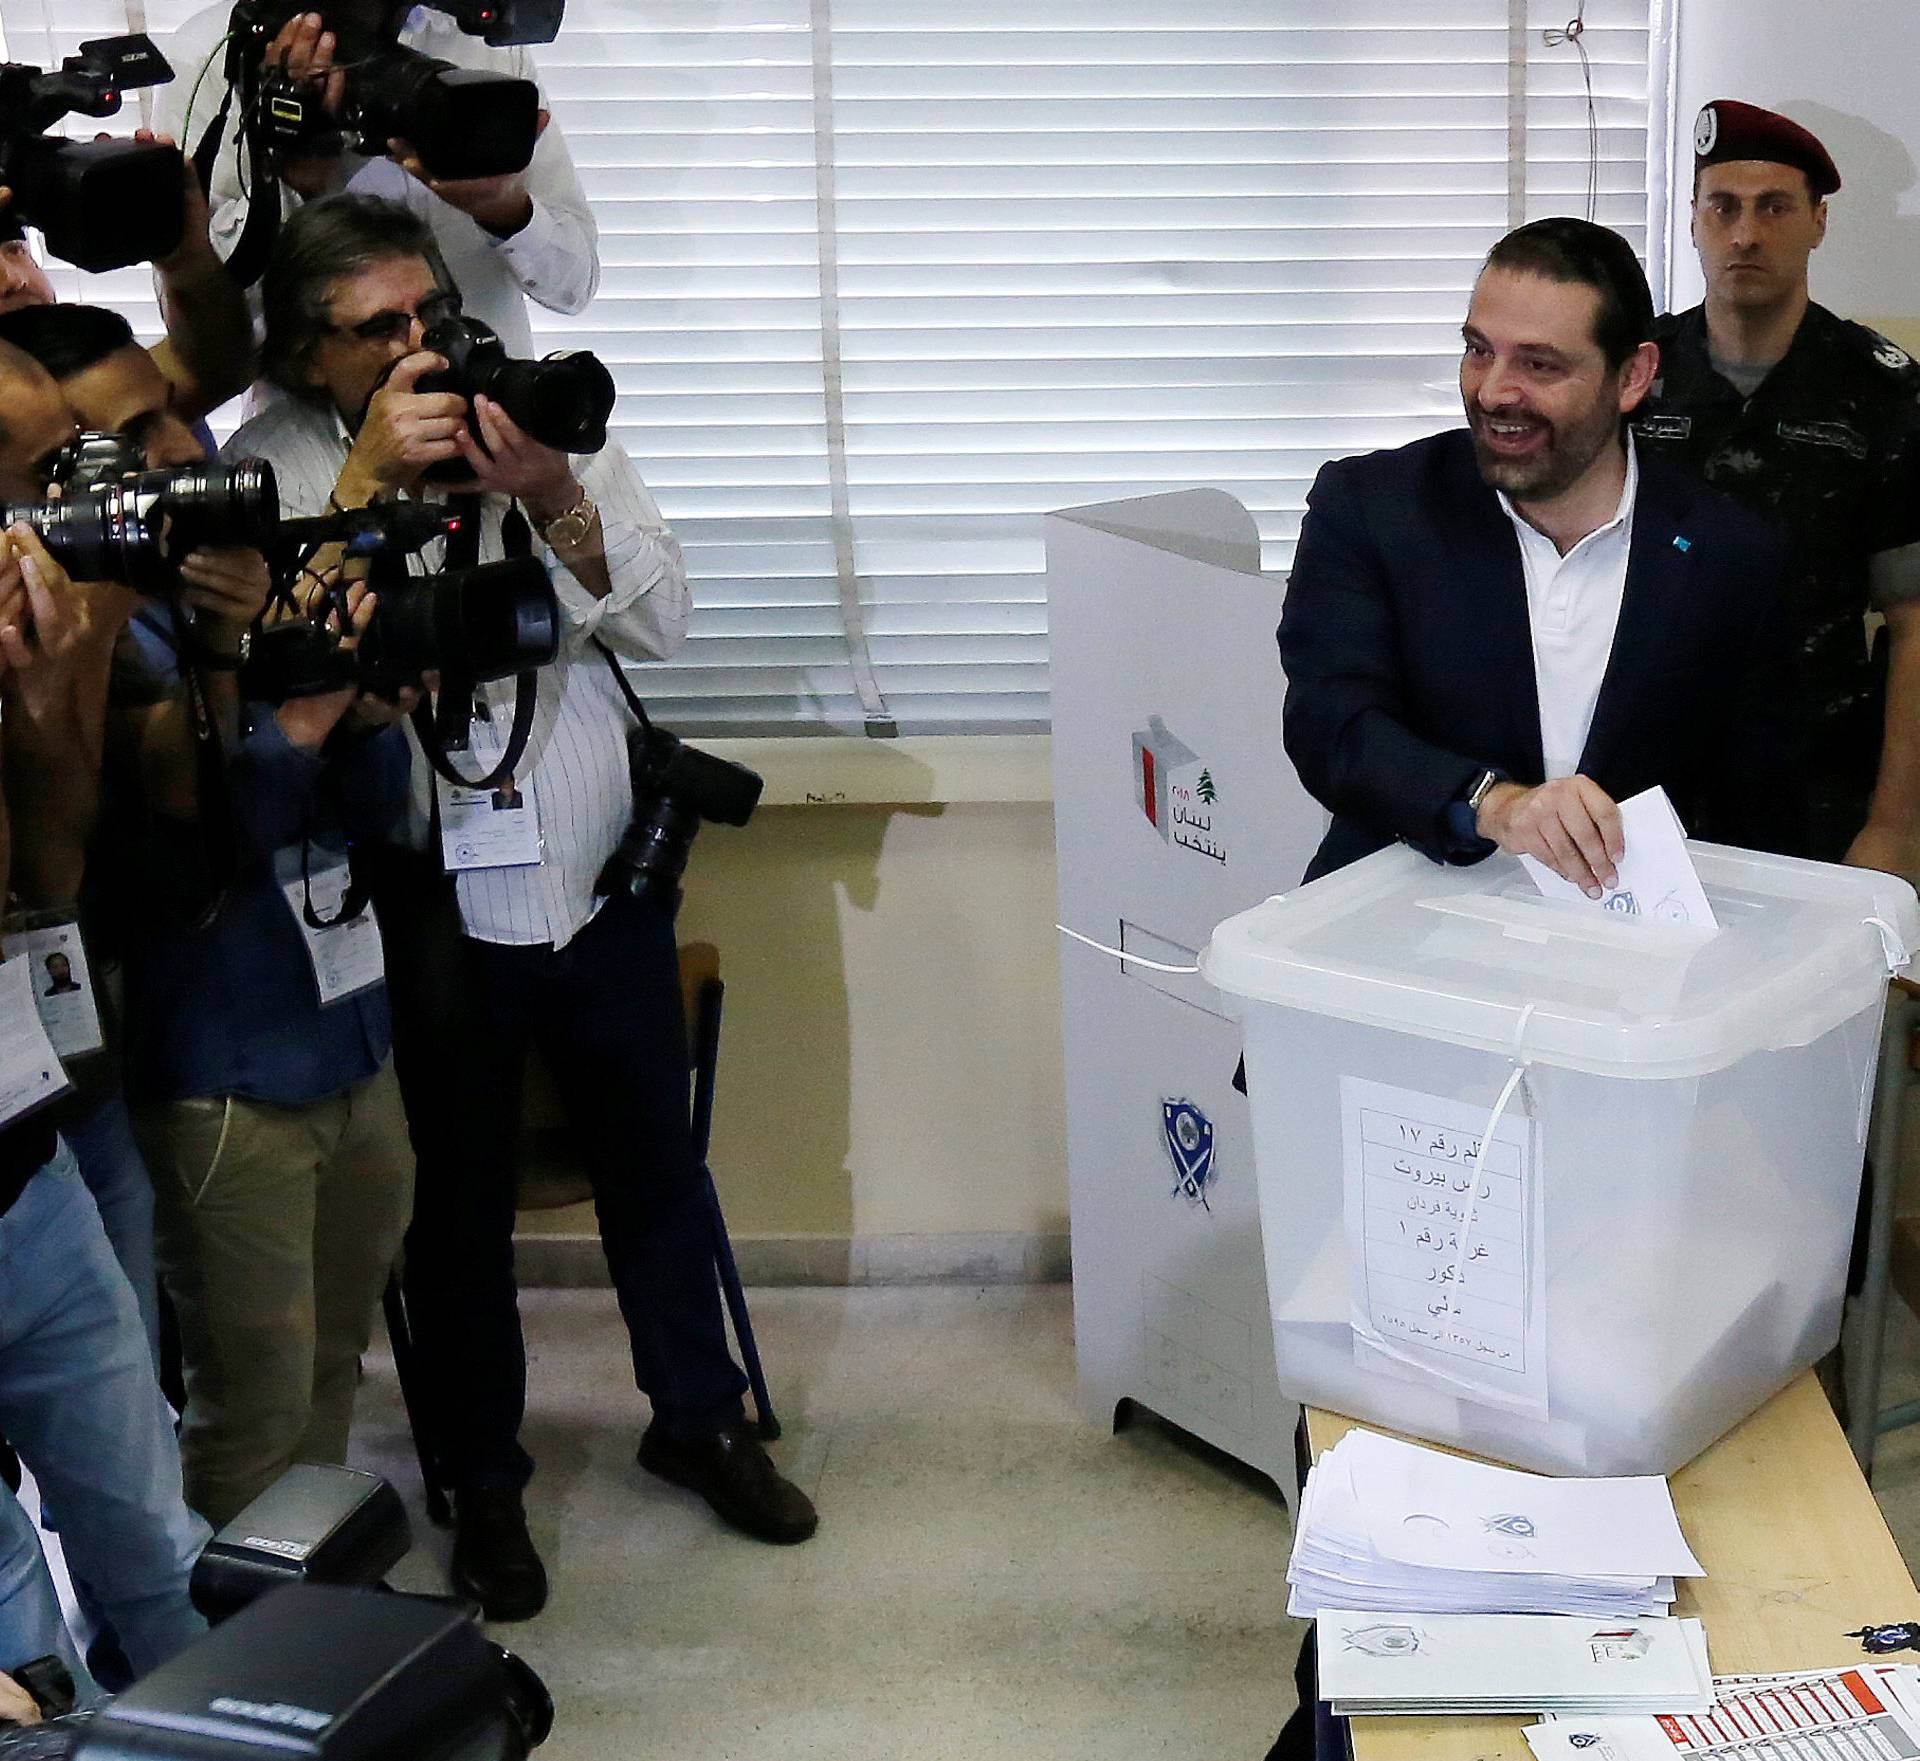 Lebanese prime minister and candidate for the parliamentary election Saad al-Hariri casts his vote at a polling station in Beirut